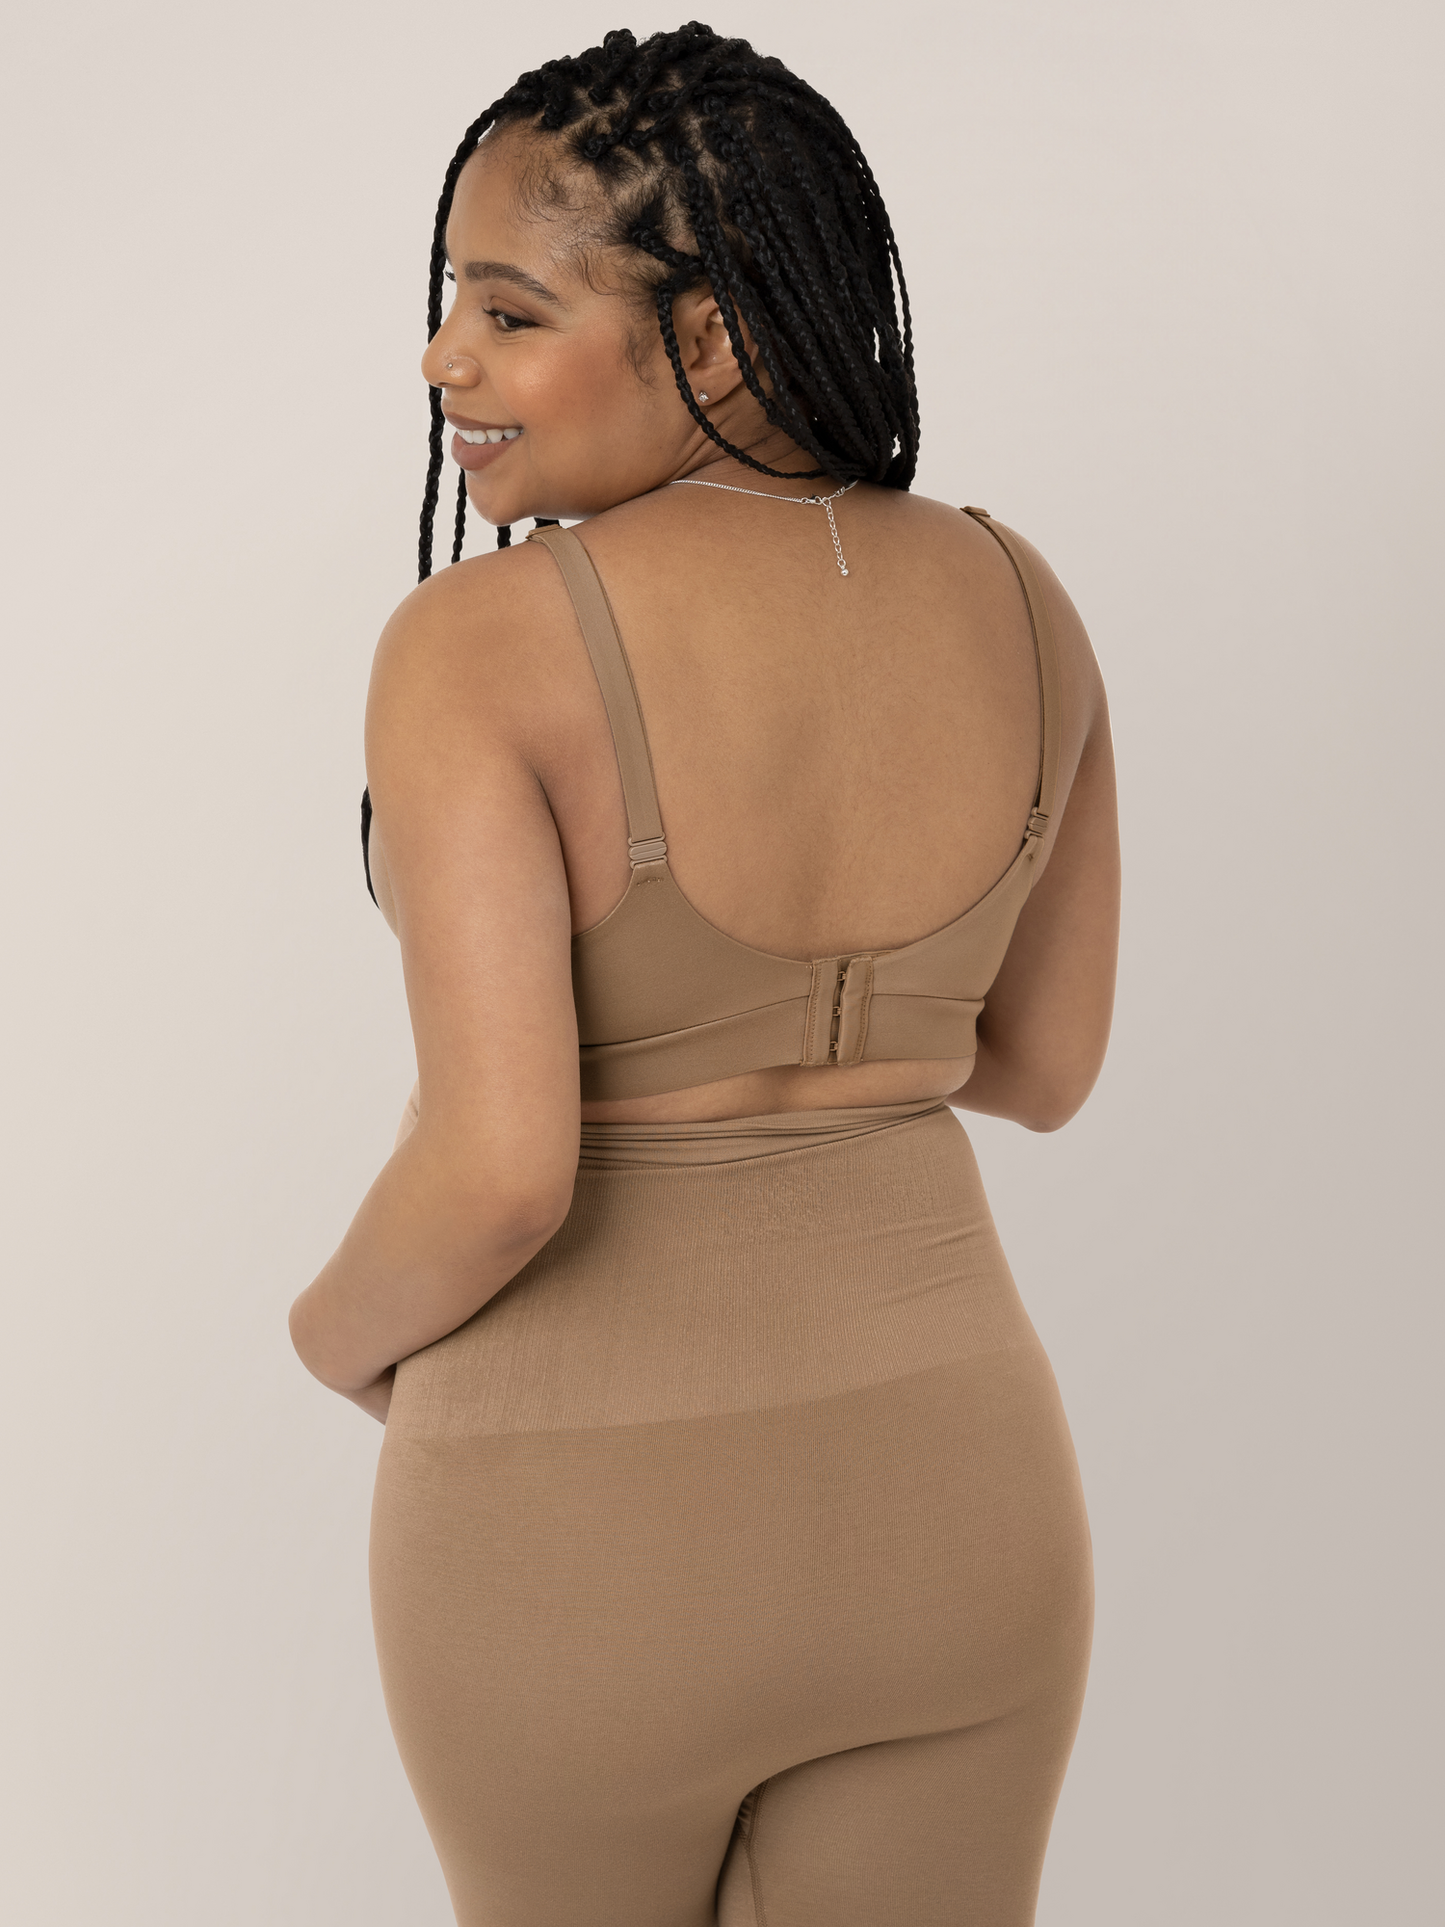 Back of a model wearing the Minimalist Hands-Free Pumping and Nursing Bra in Latte and smiling over her shoulder.